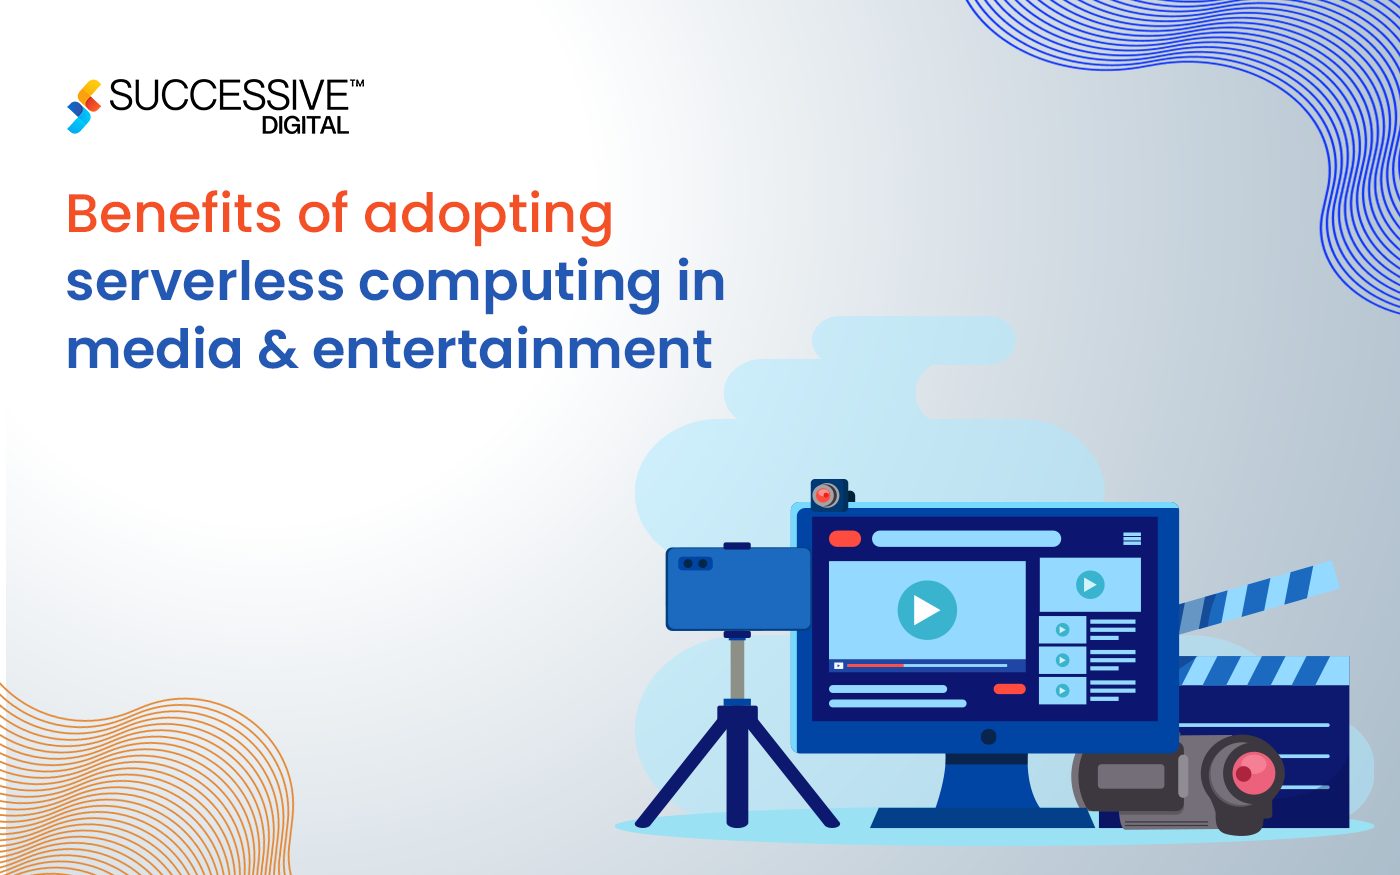 What are the Benefits of Adopting Serverless Computing in Media & Entertainment?